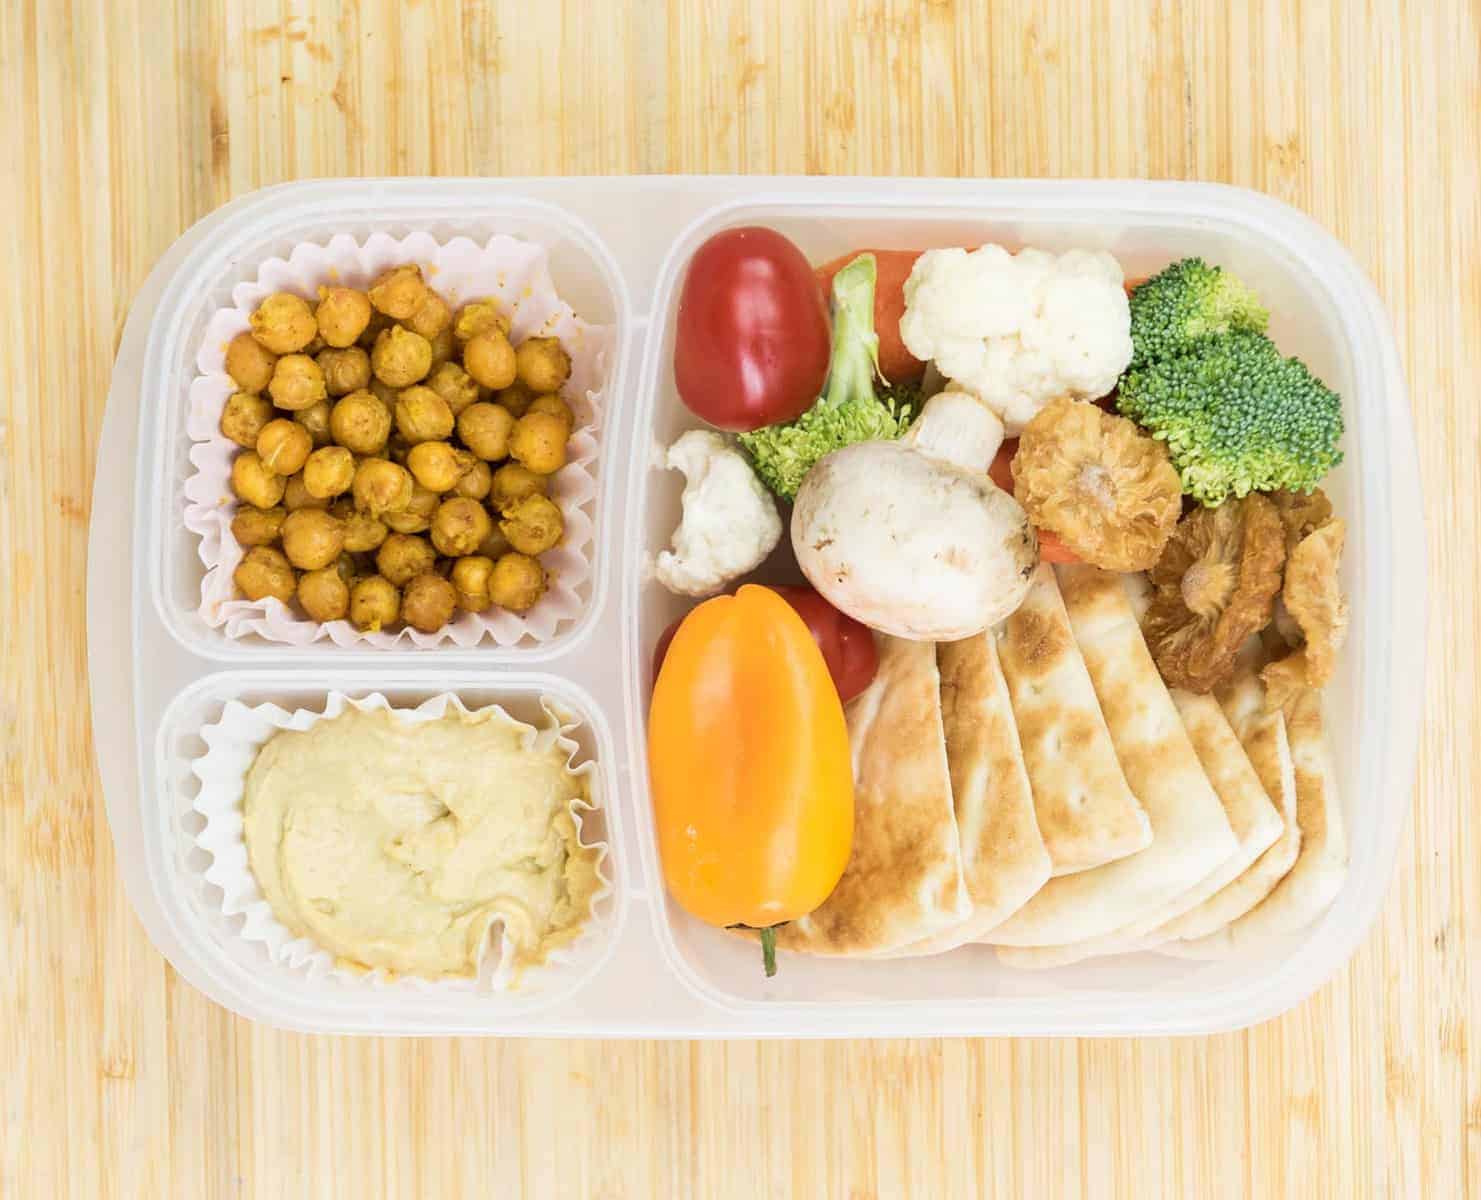 5 Healthy & Simple Lunch Box Ideas Your Kids Will Love - Simple Roots